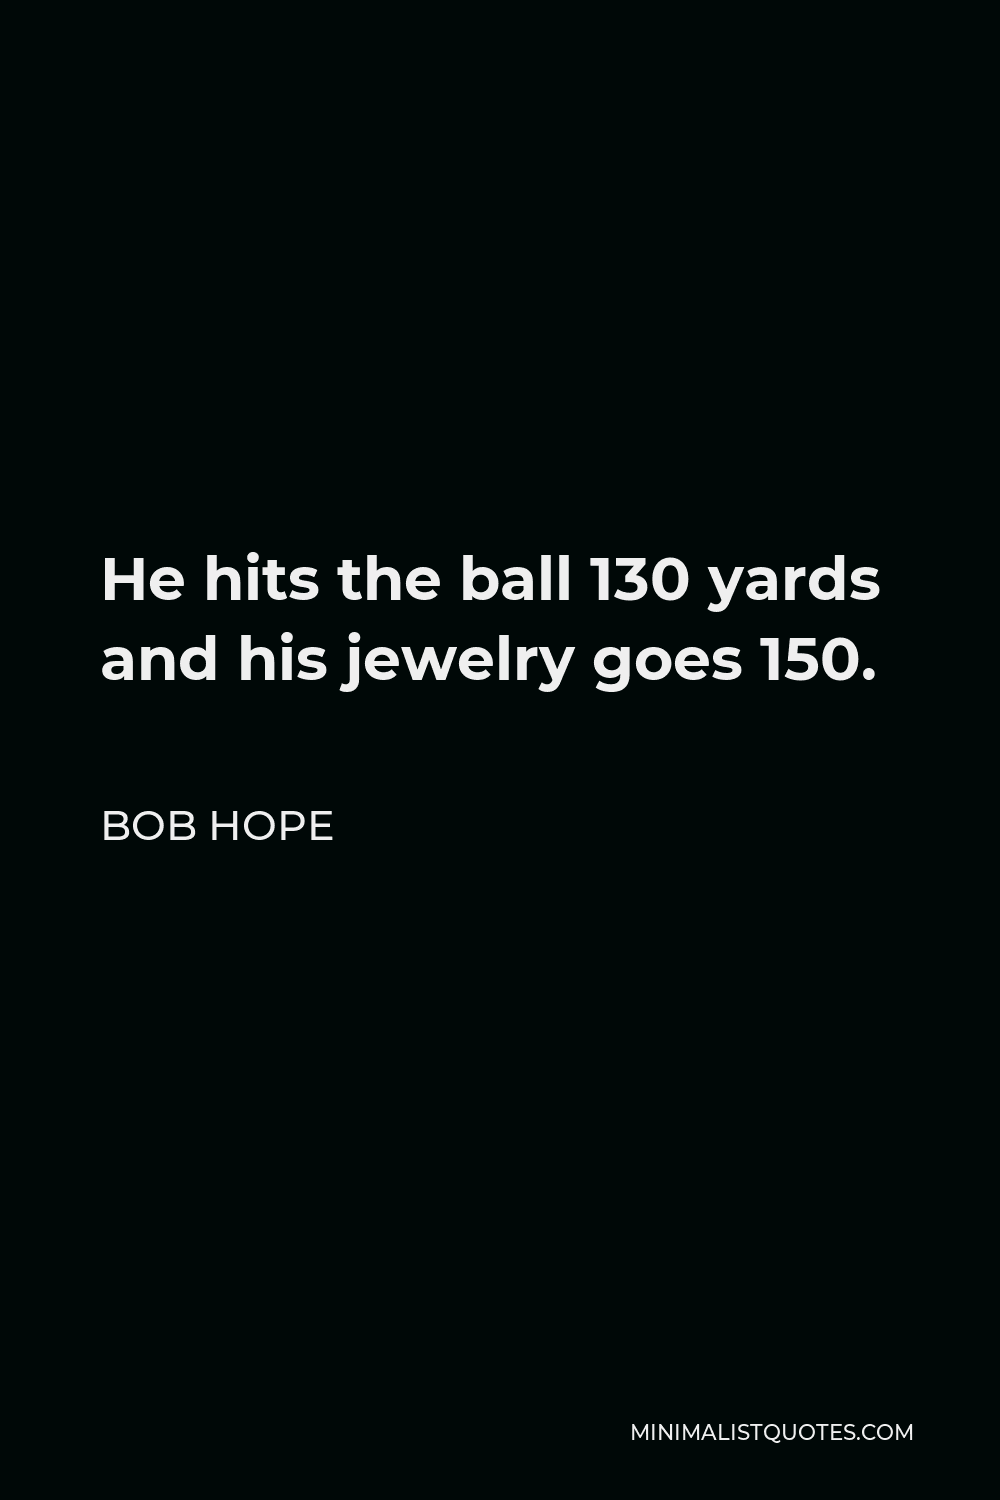 Bob Hope Quote - He hits the ball 130 yards and his jewelry goes 150.